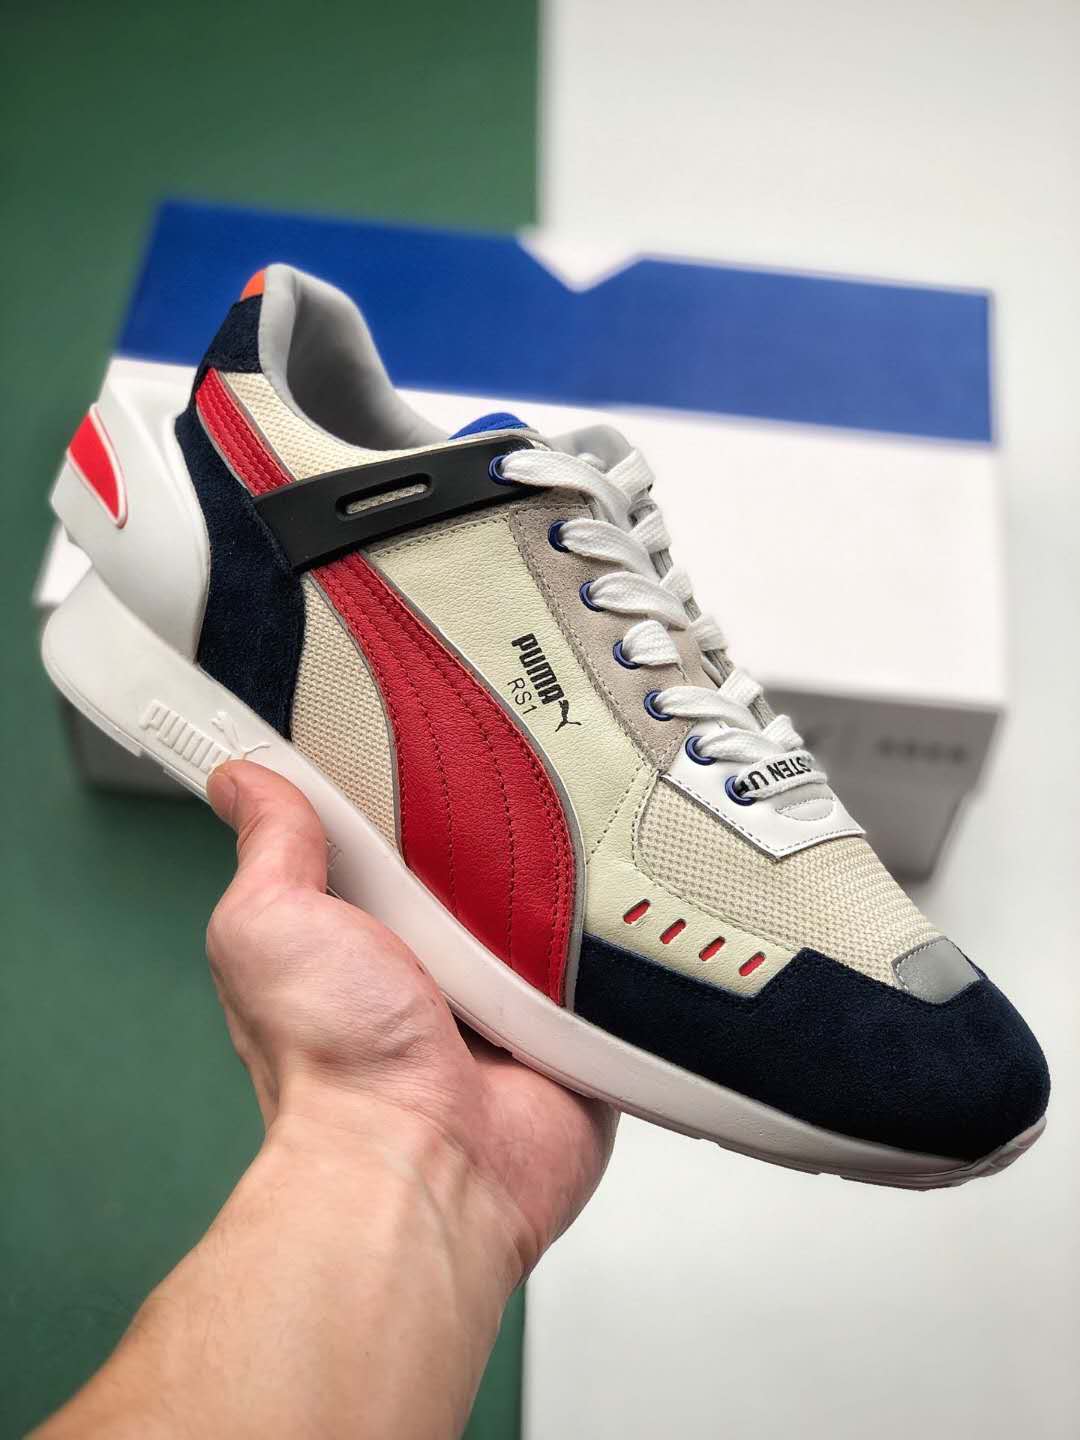 Puma Ader Error x RS-1 Sneakers - White Blue Red | 369537-01